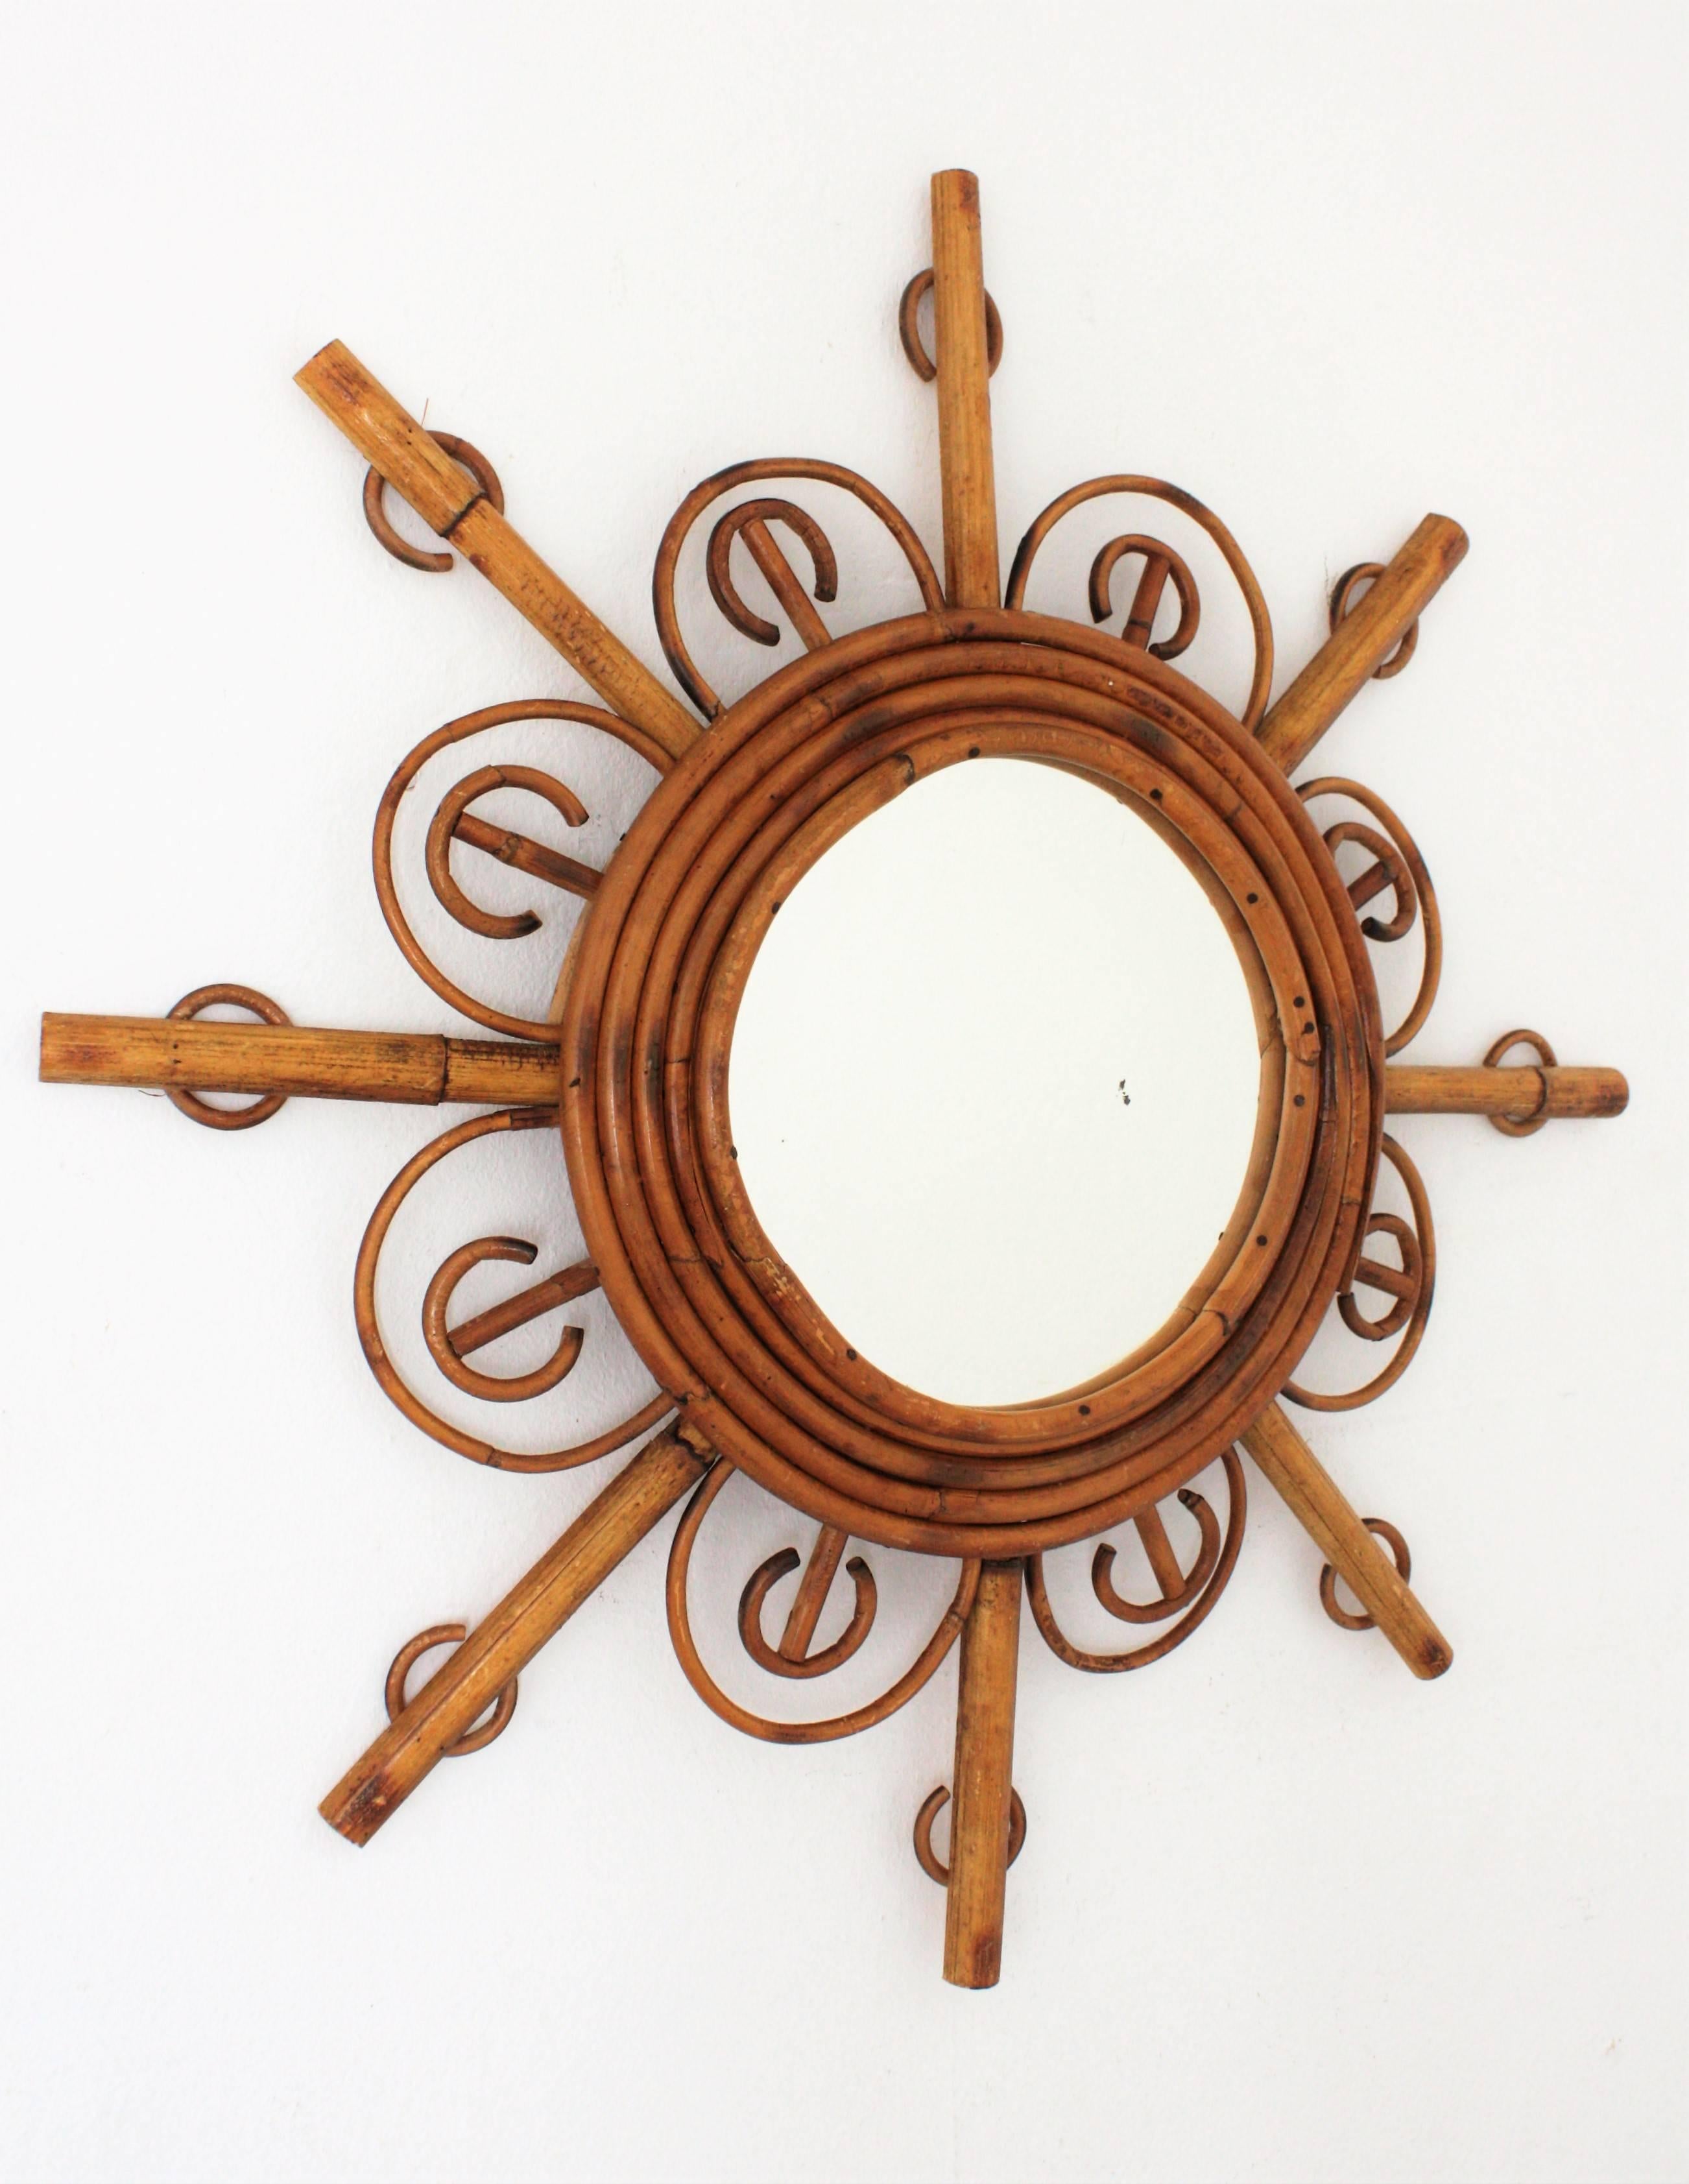 Beautiful French Riviera rattan and bamboo sunburst flower mirror. France, 1950s.
A circular glass framed by four bamboo cane laps and adorned by an alternating composition of petals and rays. This piece has all the taste of the French